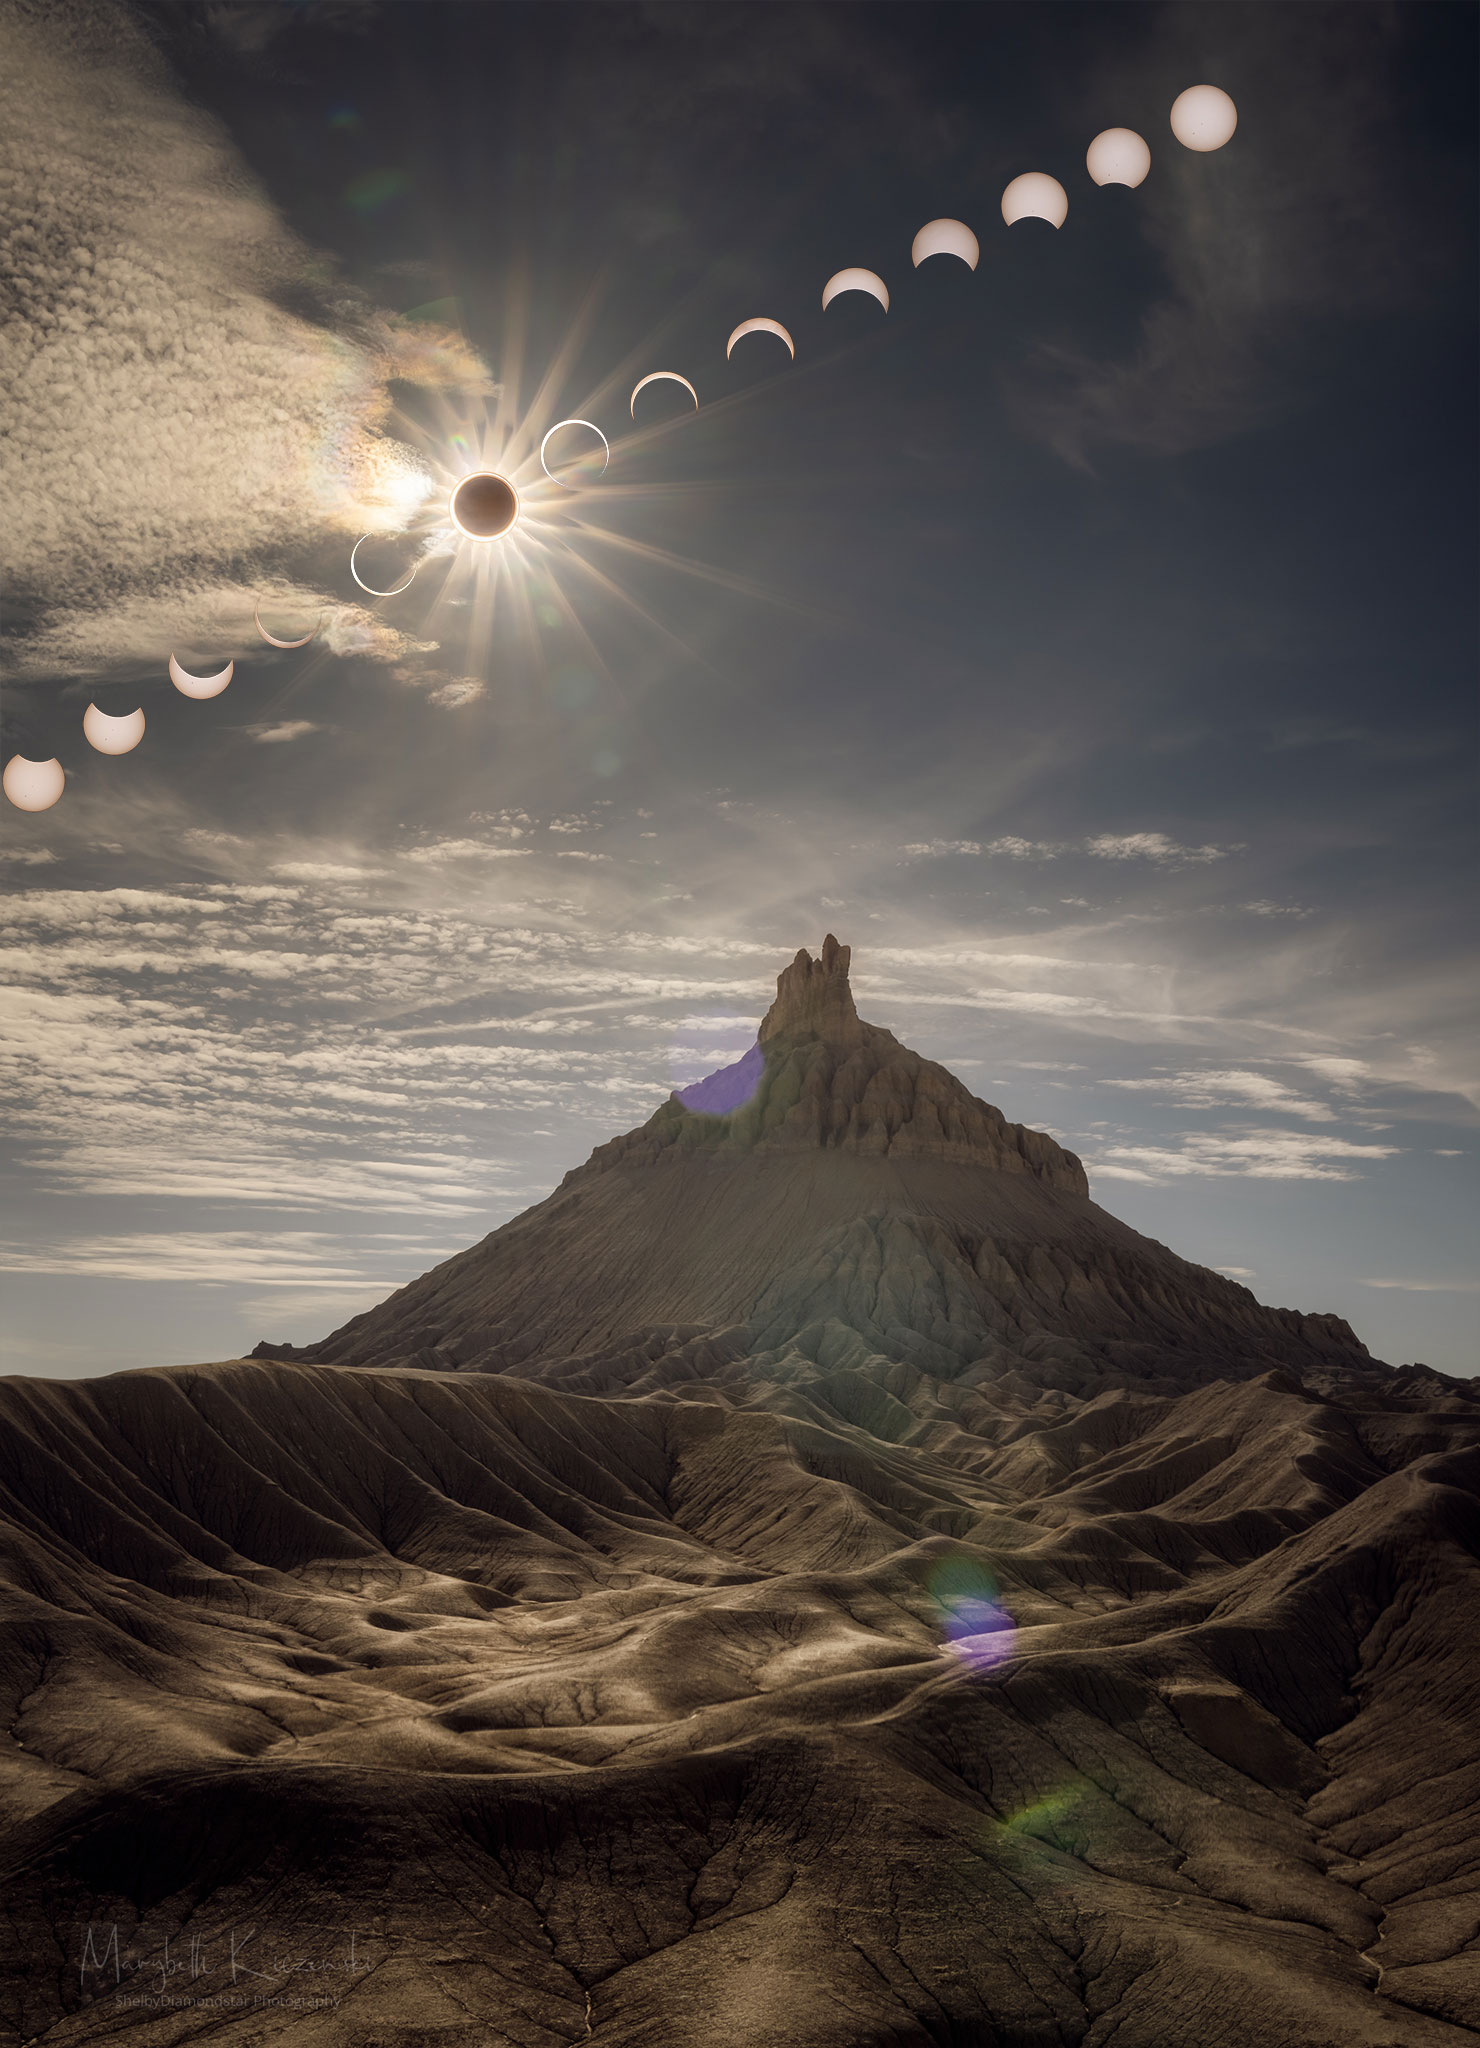 A sequence of Sun and Moon images are shown behind a
scenic foreground that features the large Factory Butte.
The foreground was taken during the maximum part of the 
annular eclipse and seems somehow oddly lit. 
Please see the explanation for more detailed information.